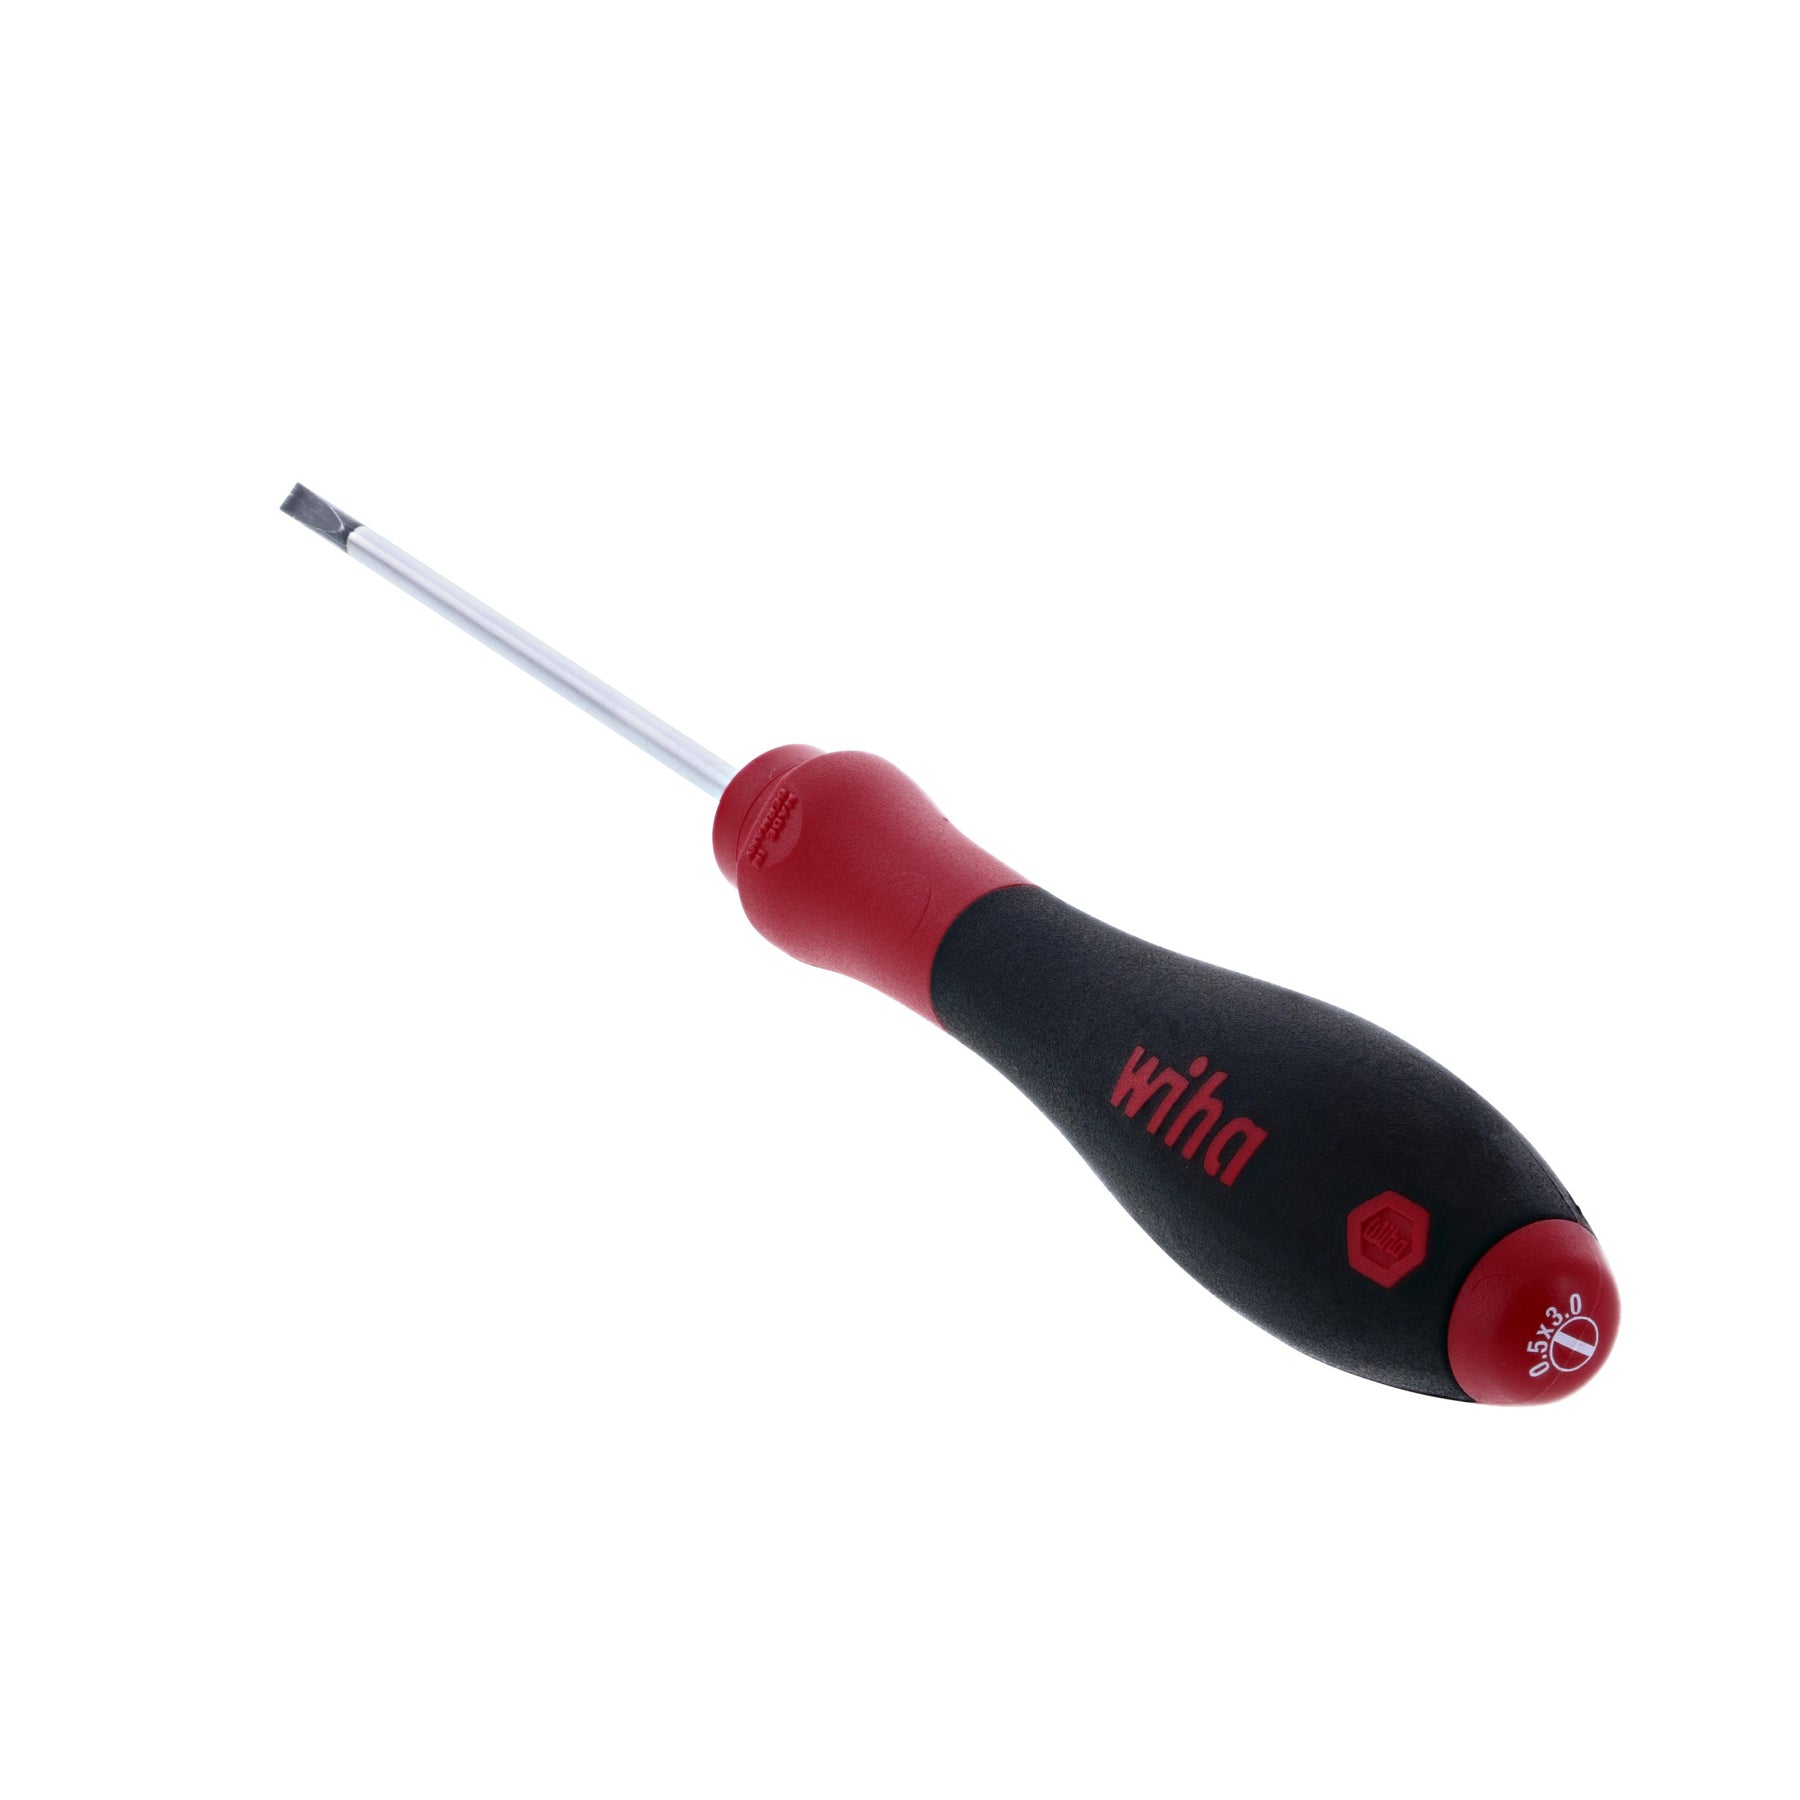 SoftFinish Slotted Screwdriver 3.0mm x 80mm